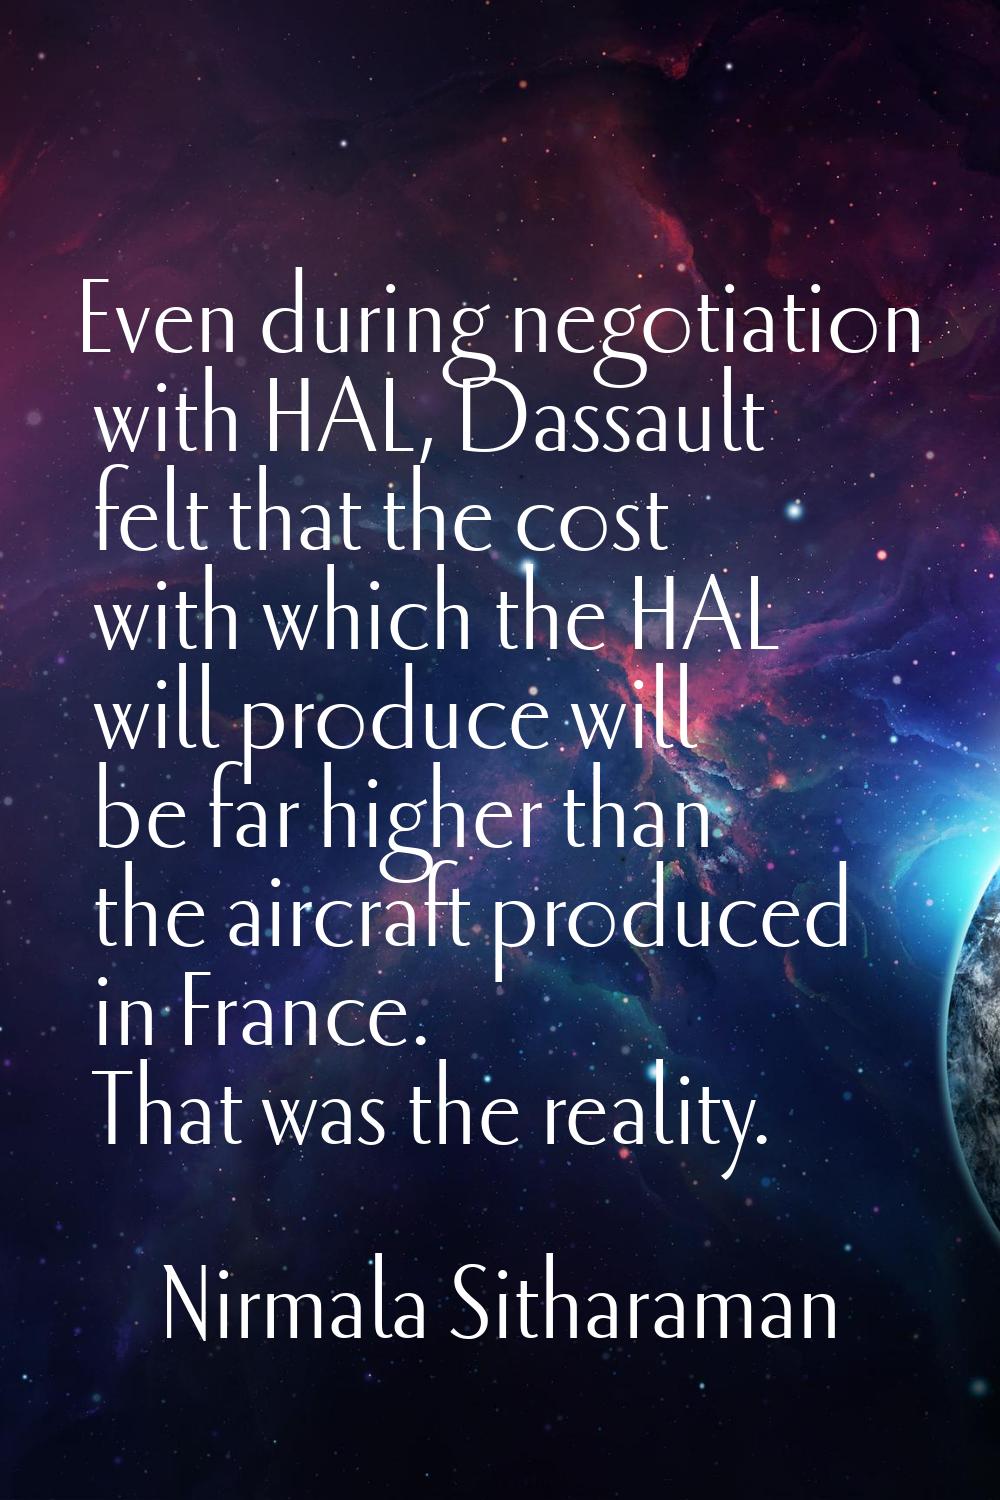 Even during negotiation with HAL, Dassault felt that the cost with which the HAL will produce will 